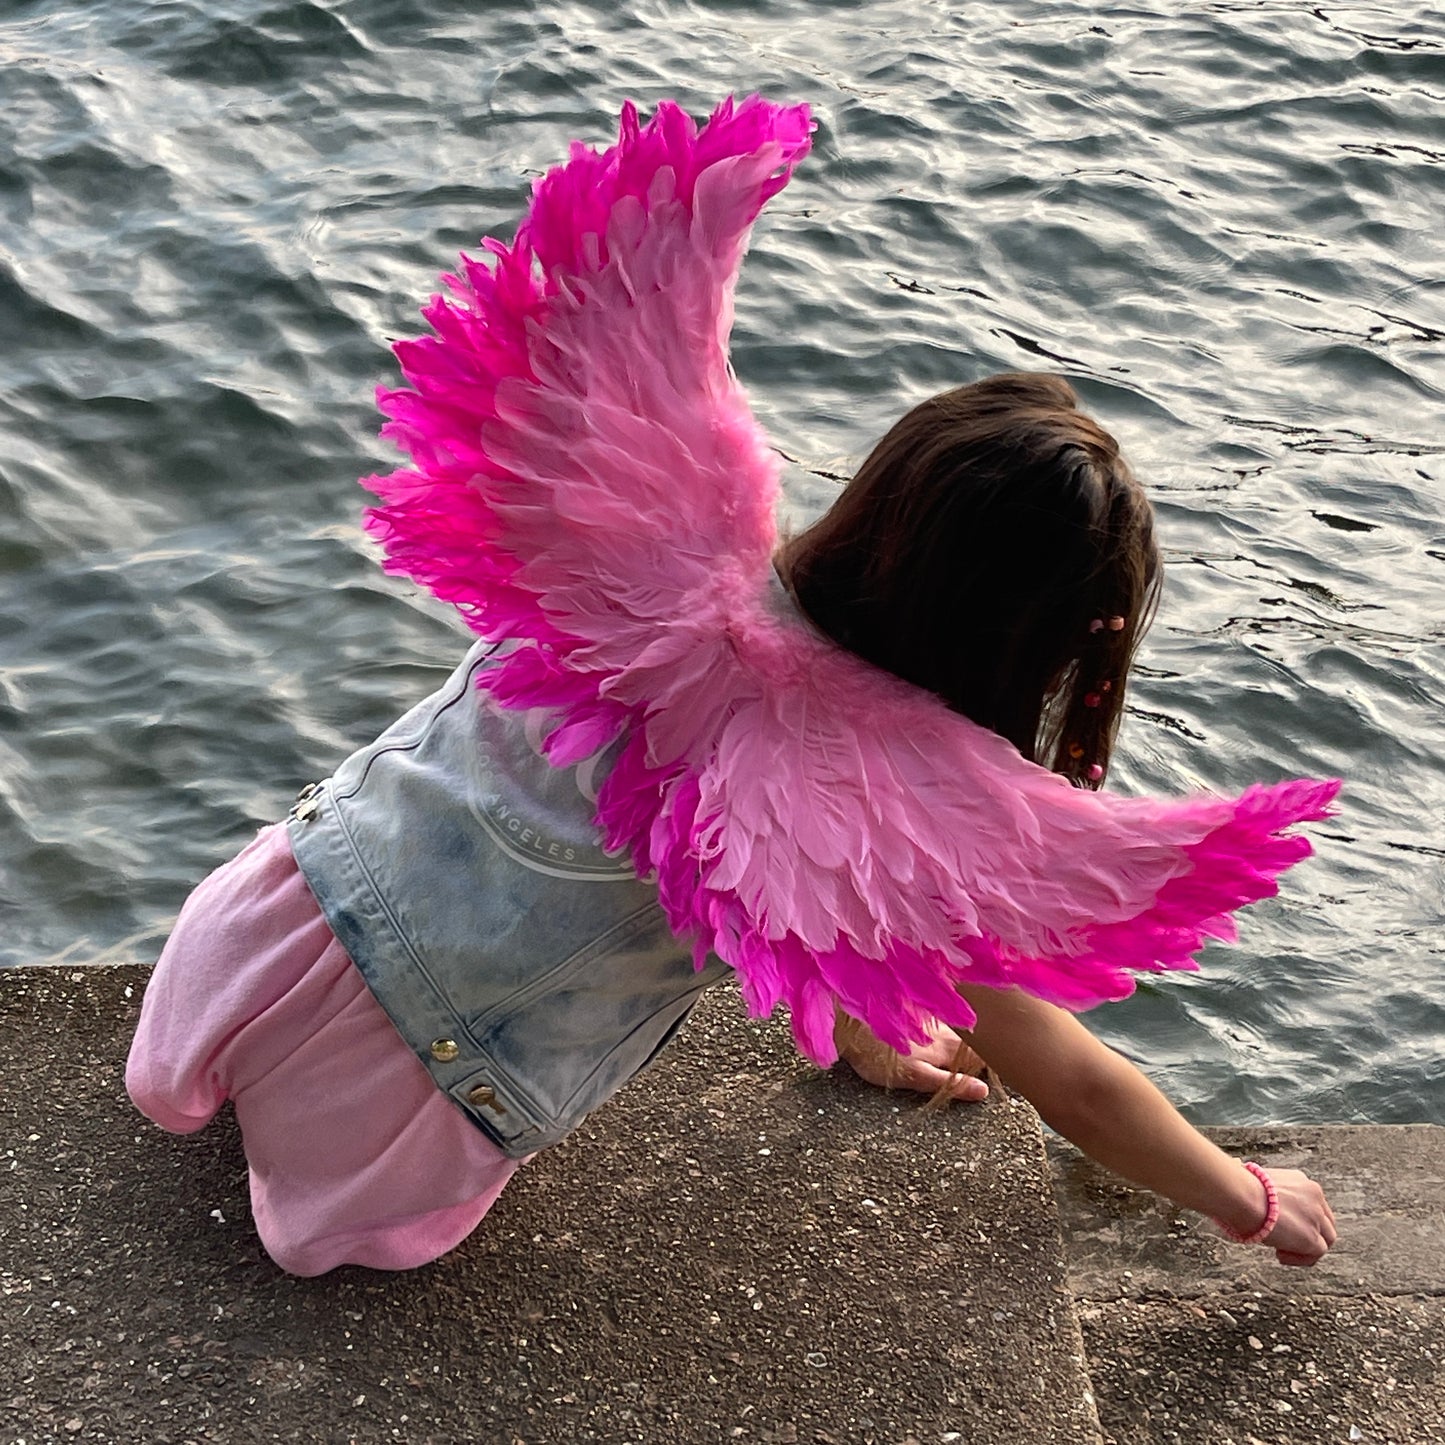 Small Two-tone Pink Wings